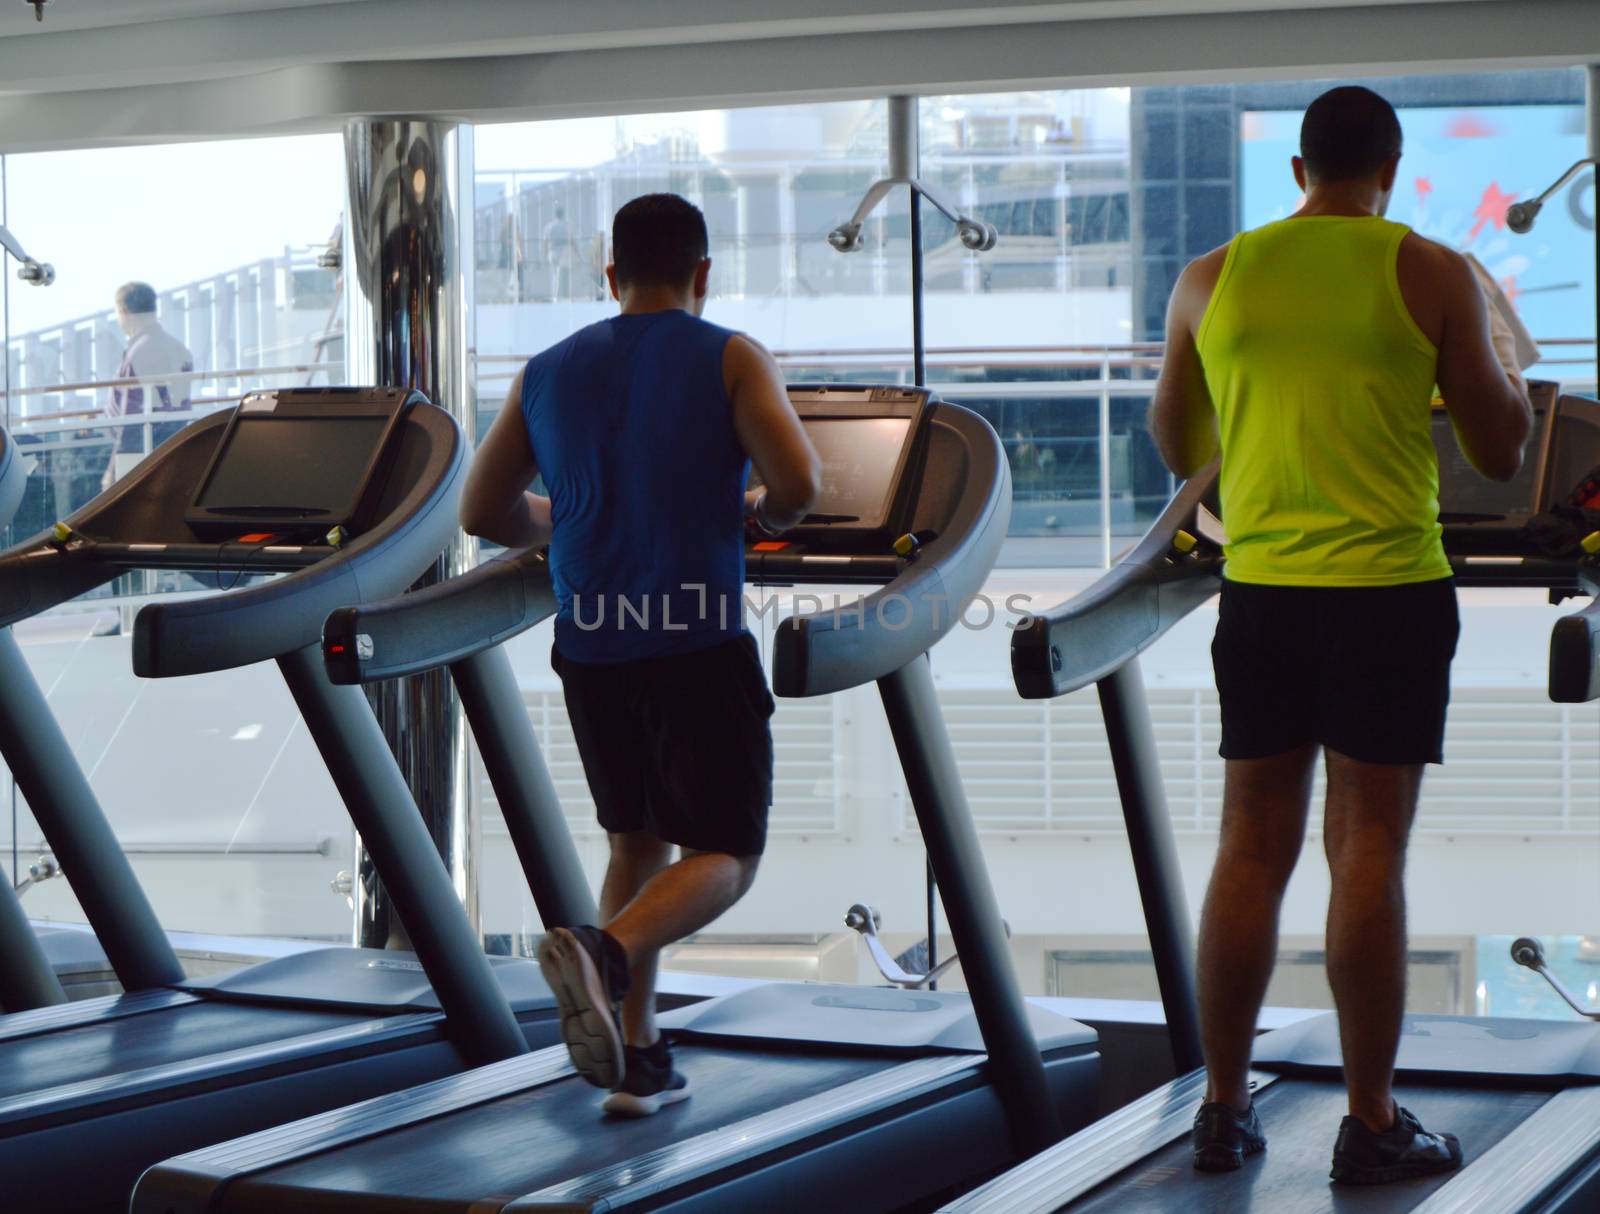 Modern gym with treadmills, people do sports on a cruise ship, the view from the back. MSC Meraviglia, 8 October 2018 by claire_lucia